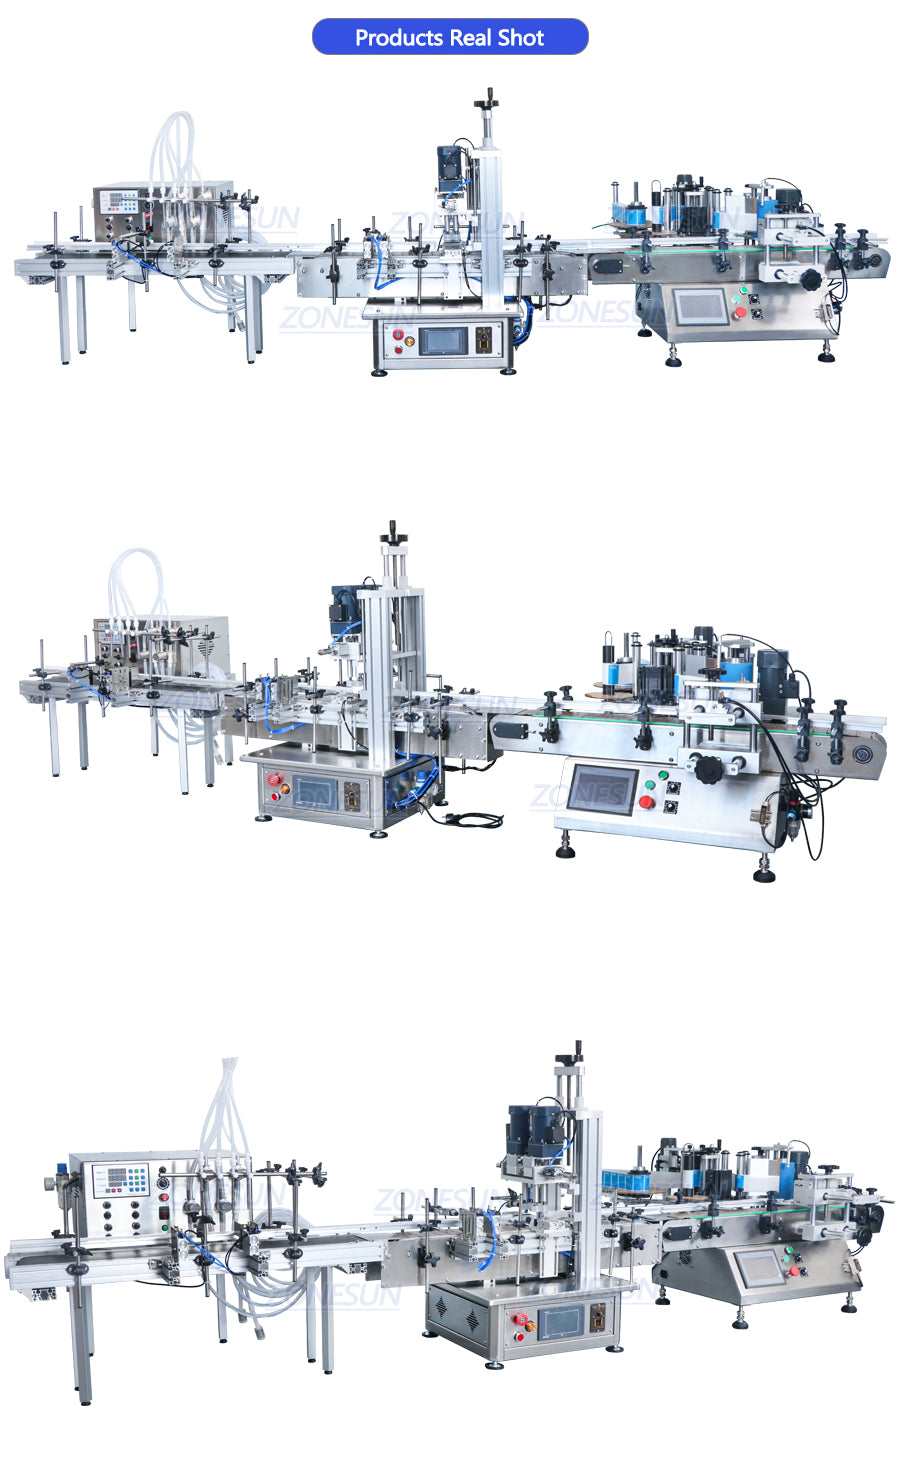 ZONESUN ZS-FAL180D Tabletop Liquid Filling Capping Double Sides Labeling Machine